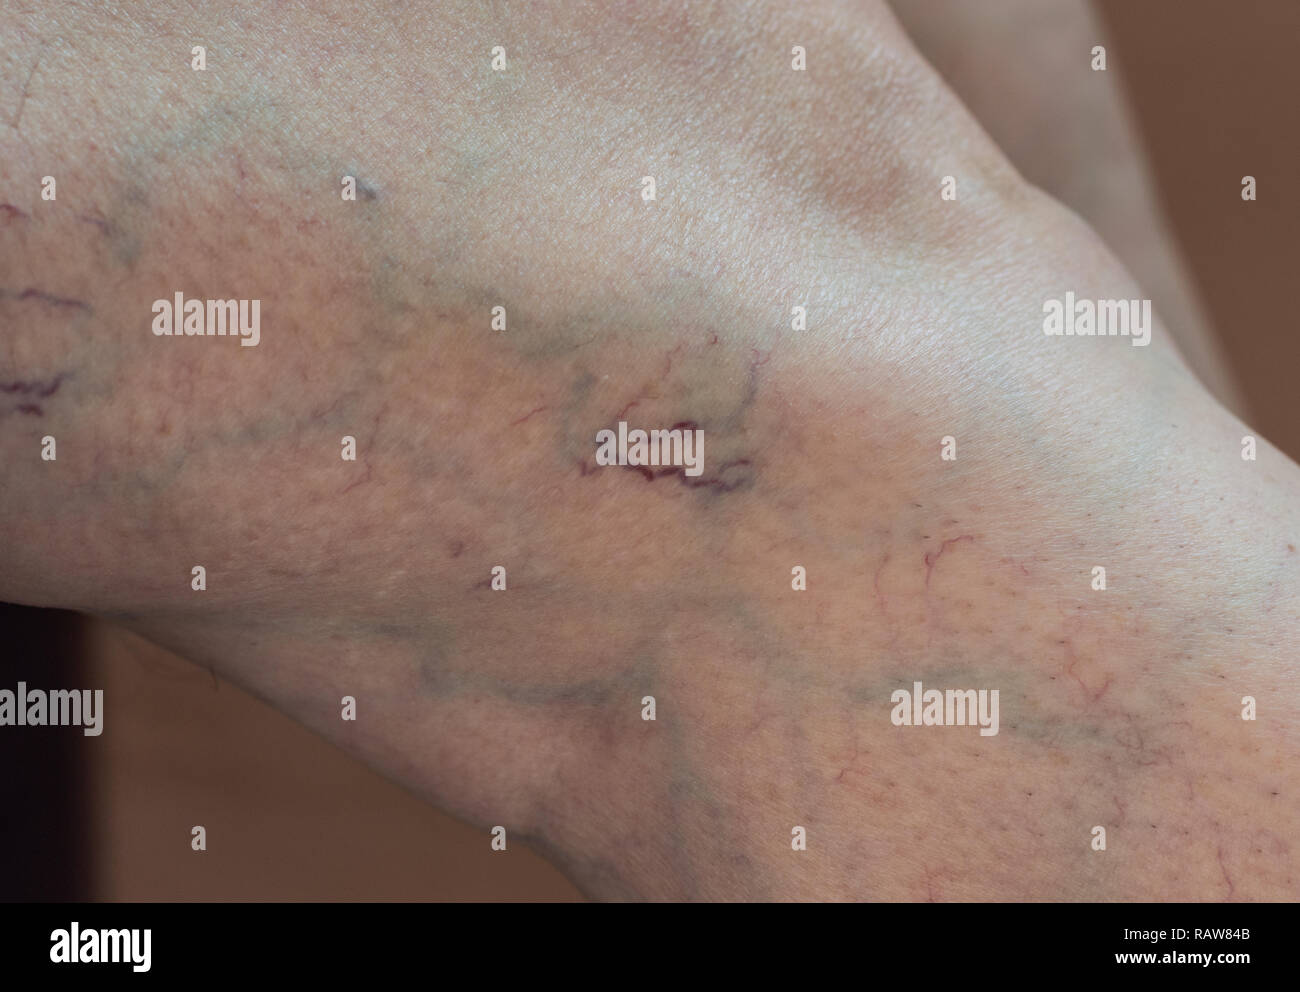 Varices, Spider veins on a woman's leg. Stock Photo